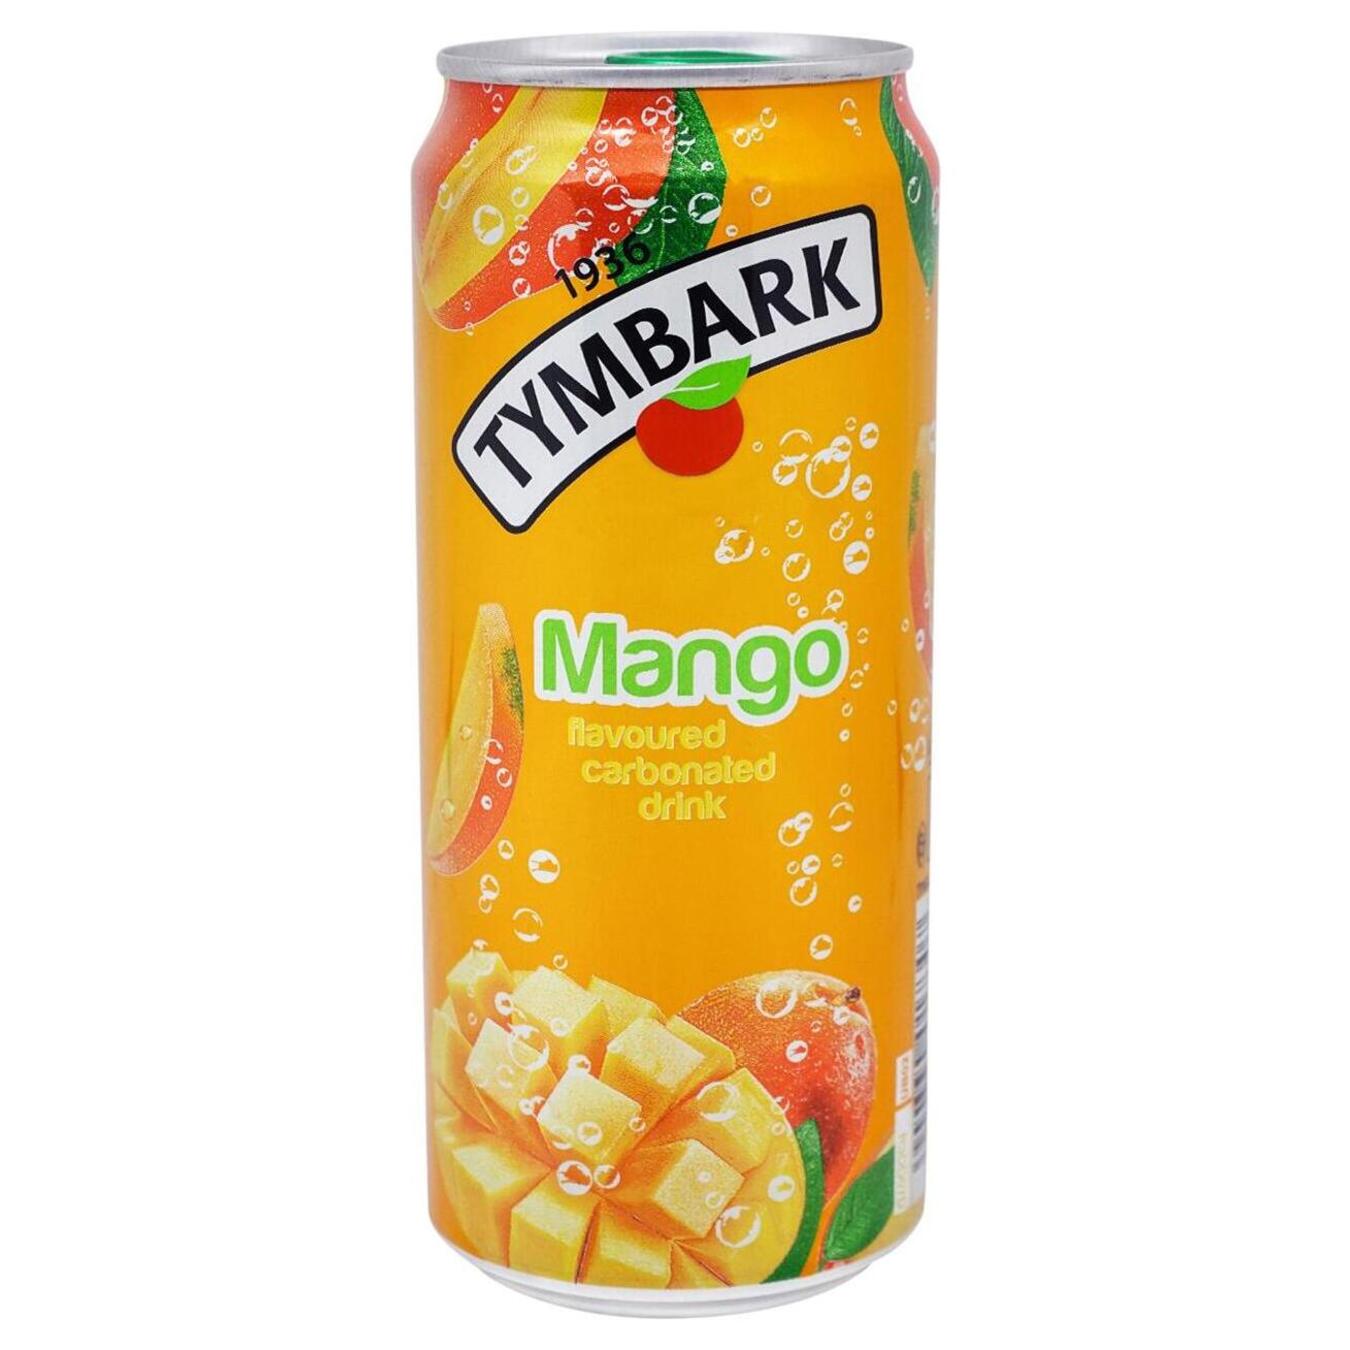 Carbonated drink Tymbark mango 0.33 iron can